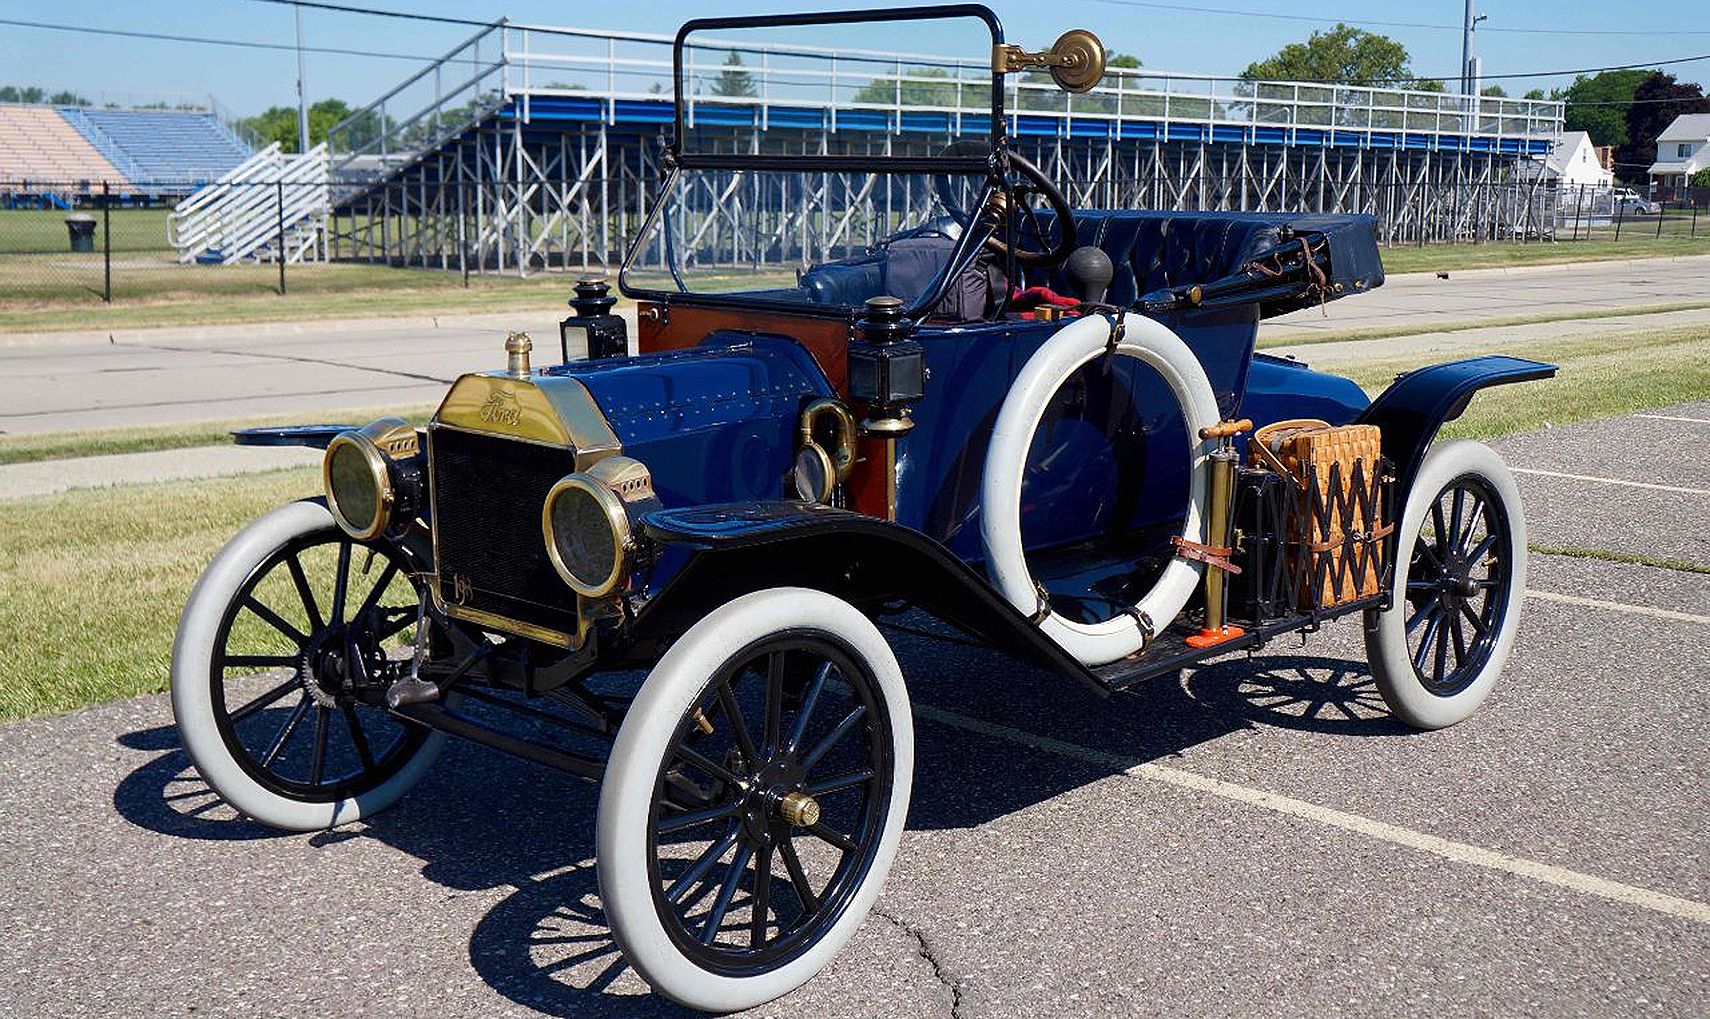 15 Pictures Of The Ford Model T That Make You Want One